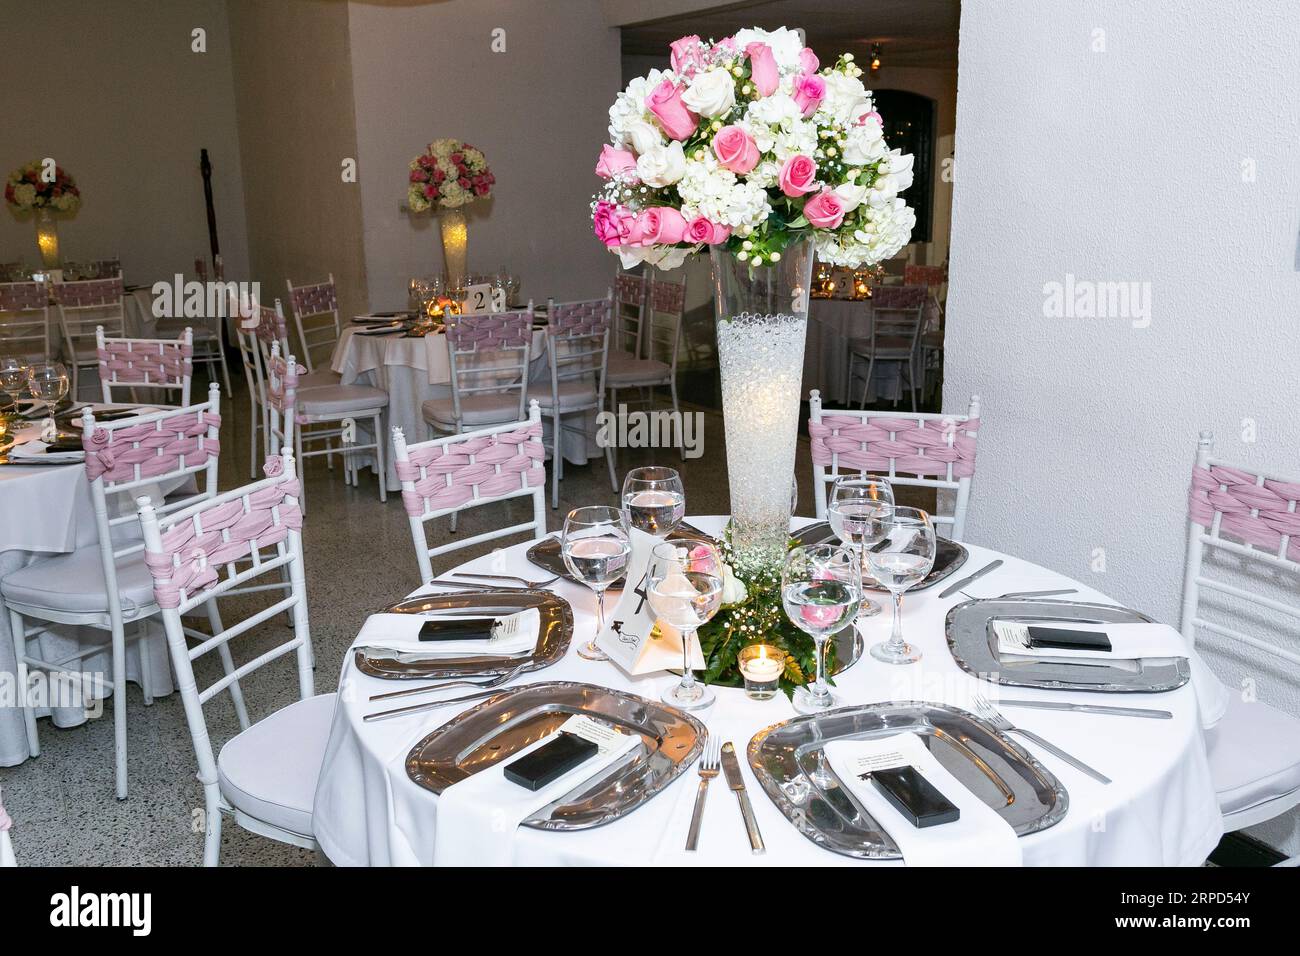 Reception Of Social Events; Tables Decorated For Events: Parties, Birthdays, Weddings, And Other Events. Stock Photo